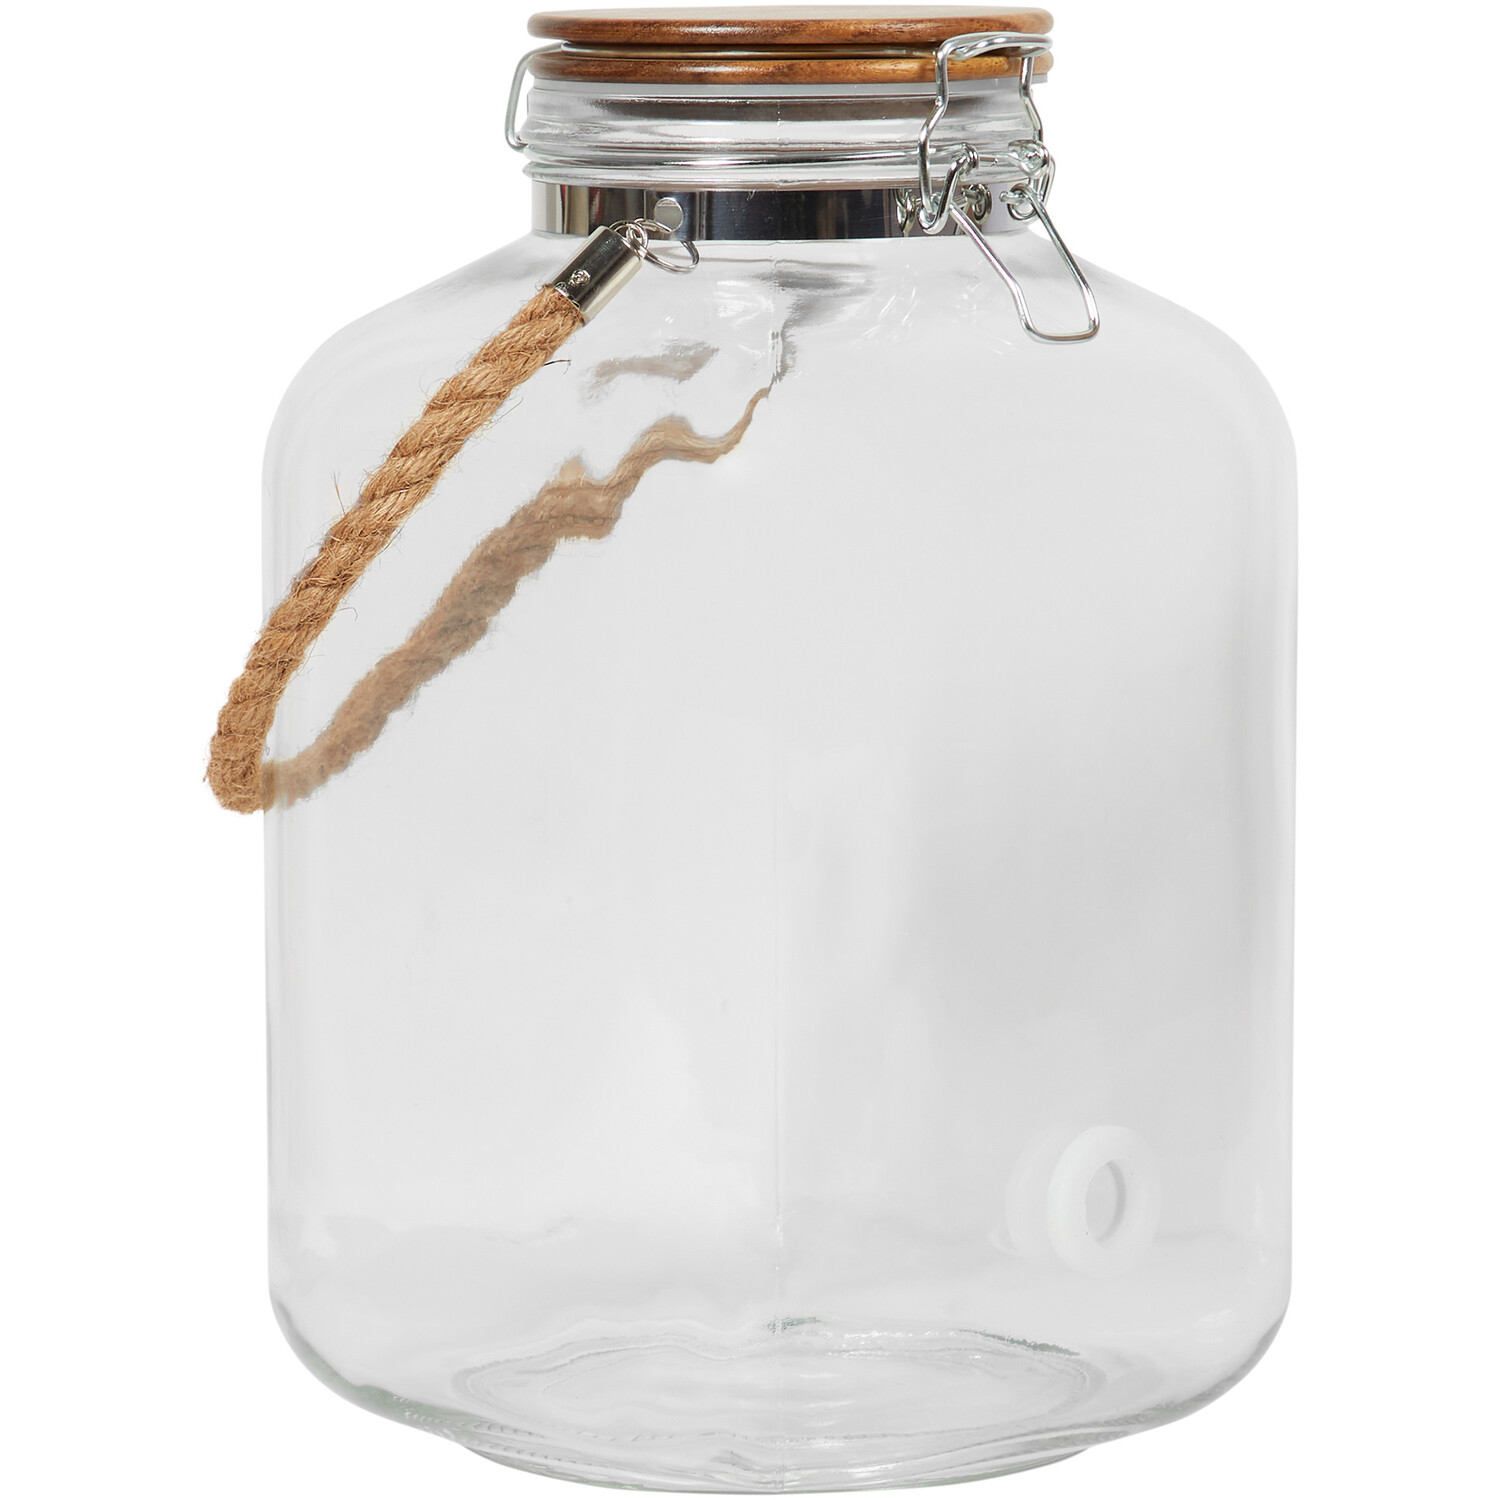 Glass Dispenser with Rope Handle Image 1